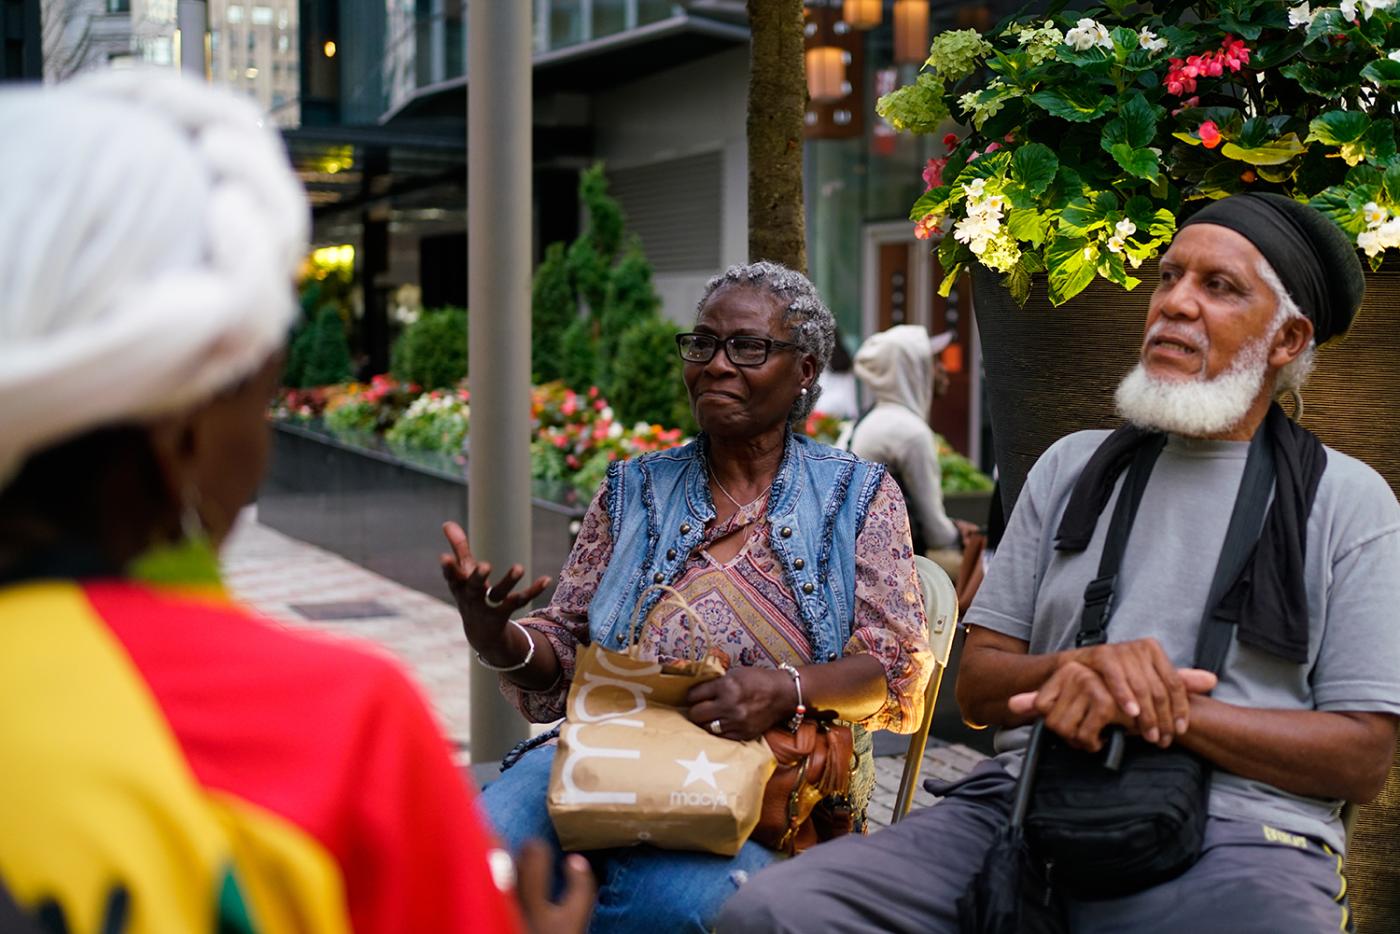 Four Black elders sit together and chat with their hands.